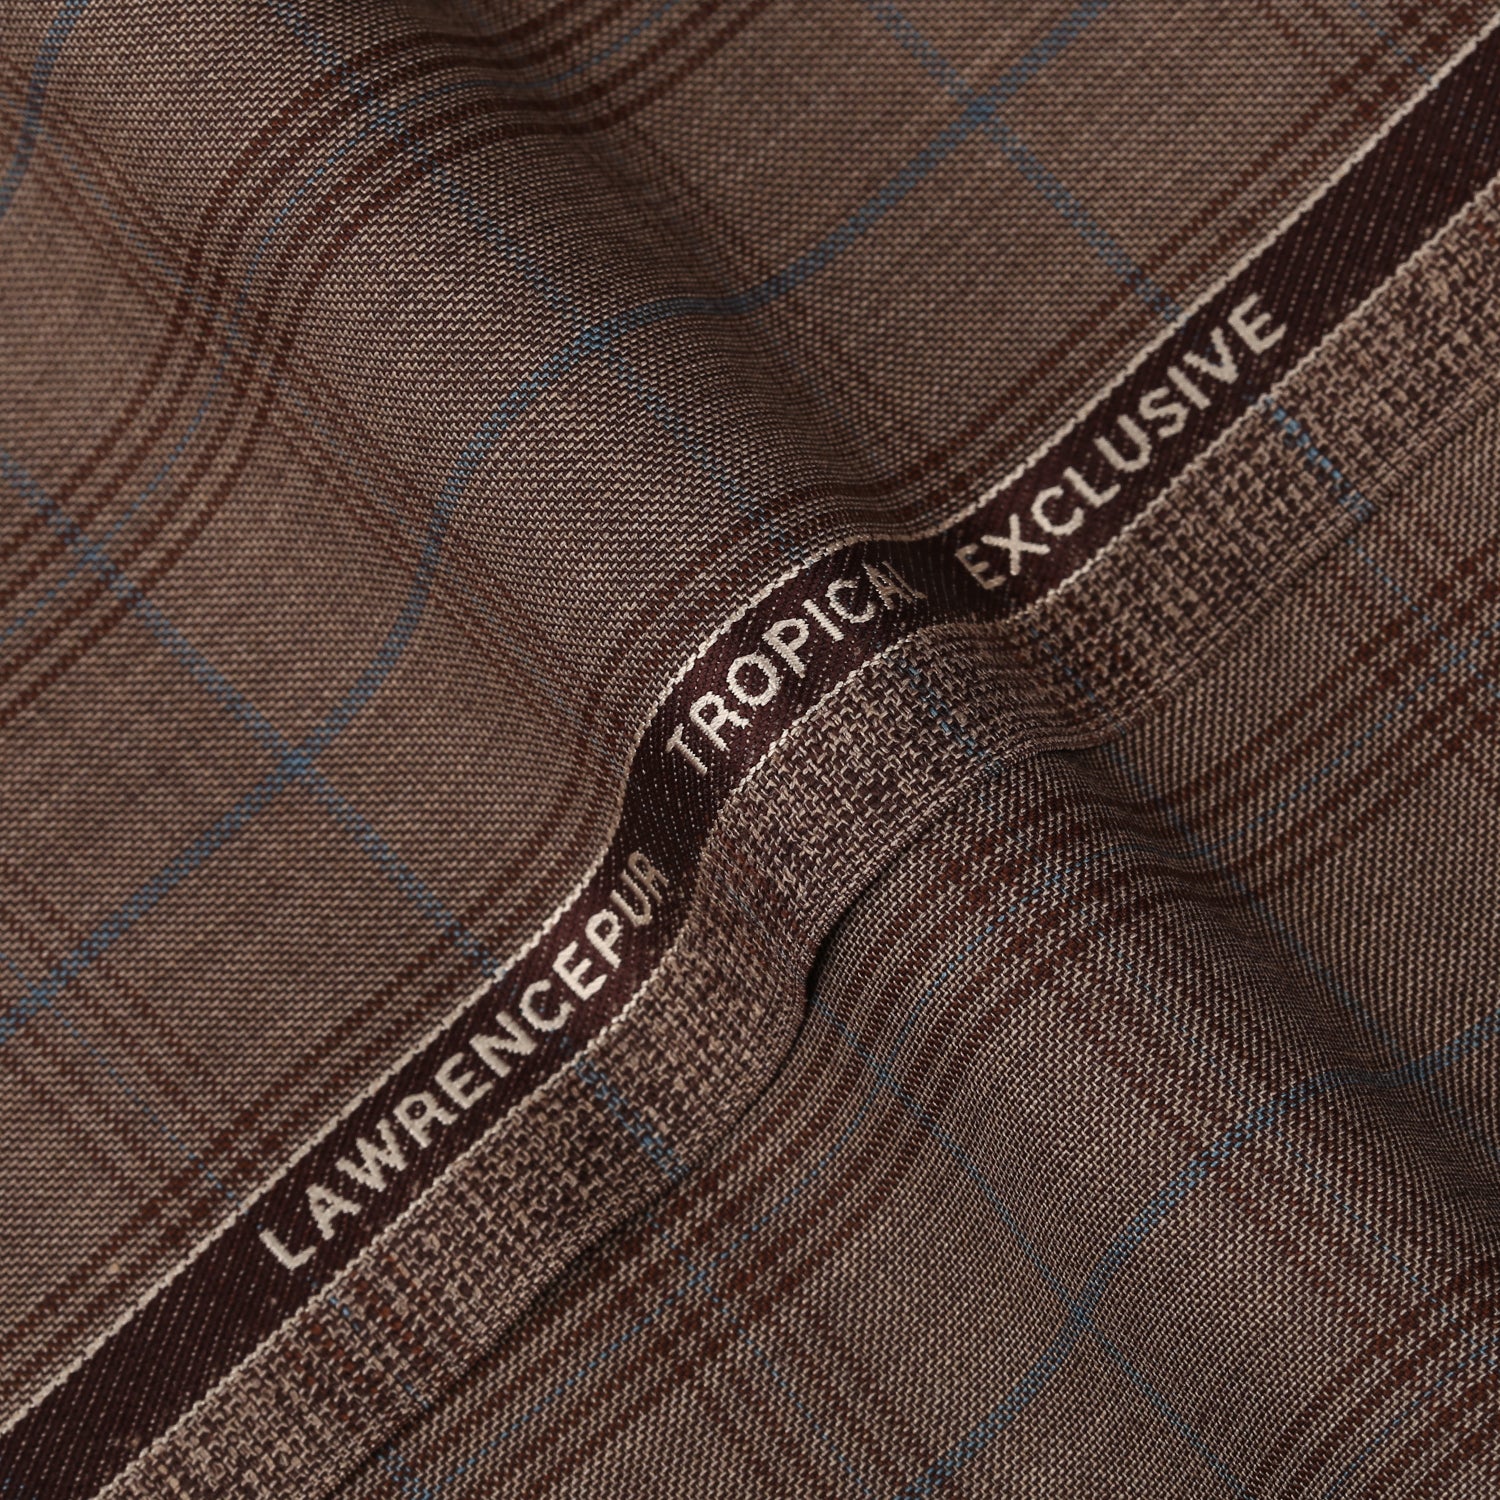 Big Checks-Caramel Brown, Wool Blend, Tropical Exclusive Suiting Fabric